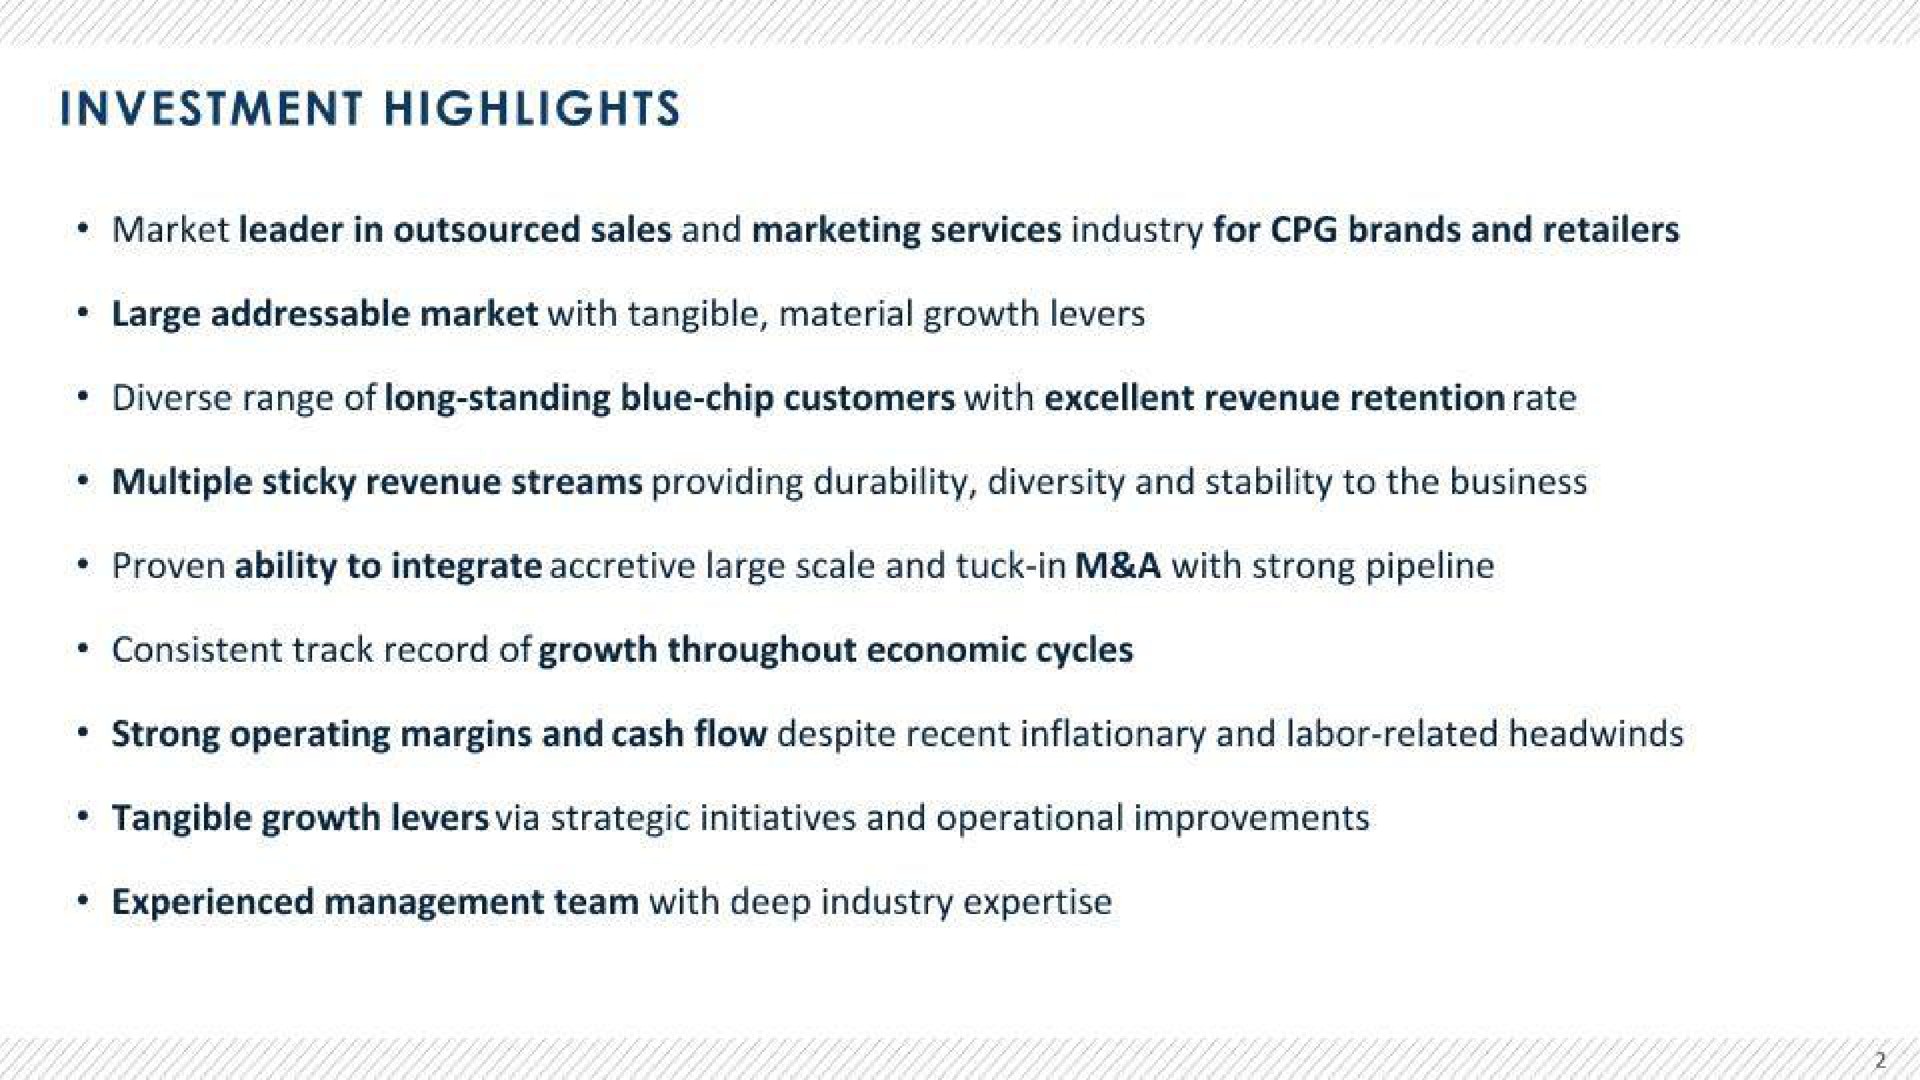 investment highlights market leader in sales and marketing services industry for brands and retailers large market with tangible material growth levers diverse range of long standing blue chip customers with excellent revenue retention rate multiple sticky revenue streams providing durability diversity and stability to the business proven ability to integrate accretive large scale and tuck in a with strong pipeline consistent track record of growth throughout economic cycles strong operating margins and cash flow despite recent inflationary and labor related tangible growth levers via strategic initiatives and operational improvements experienced management team with deep industry | Advantage Solutions